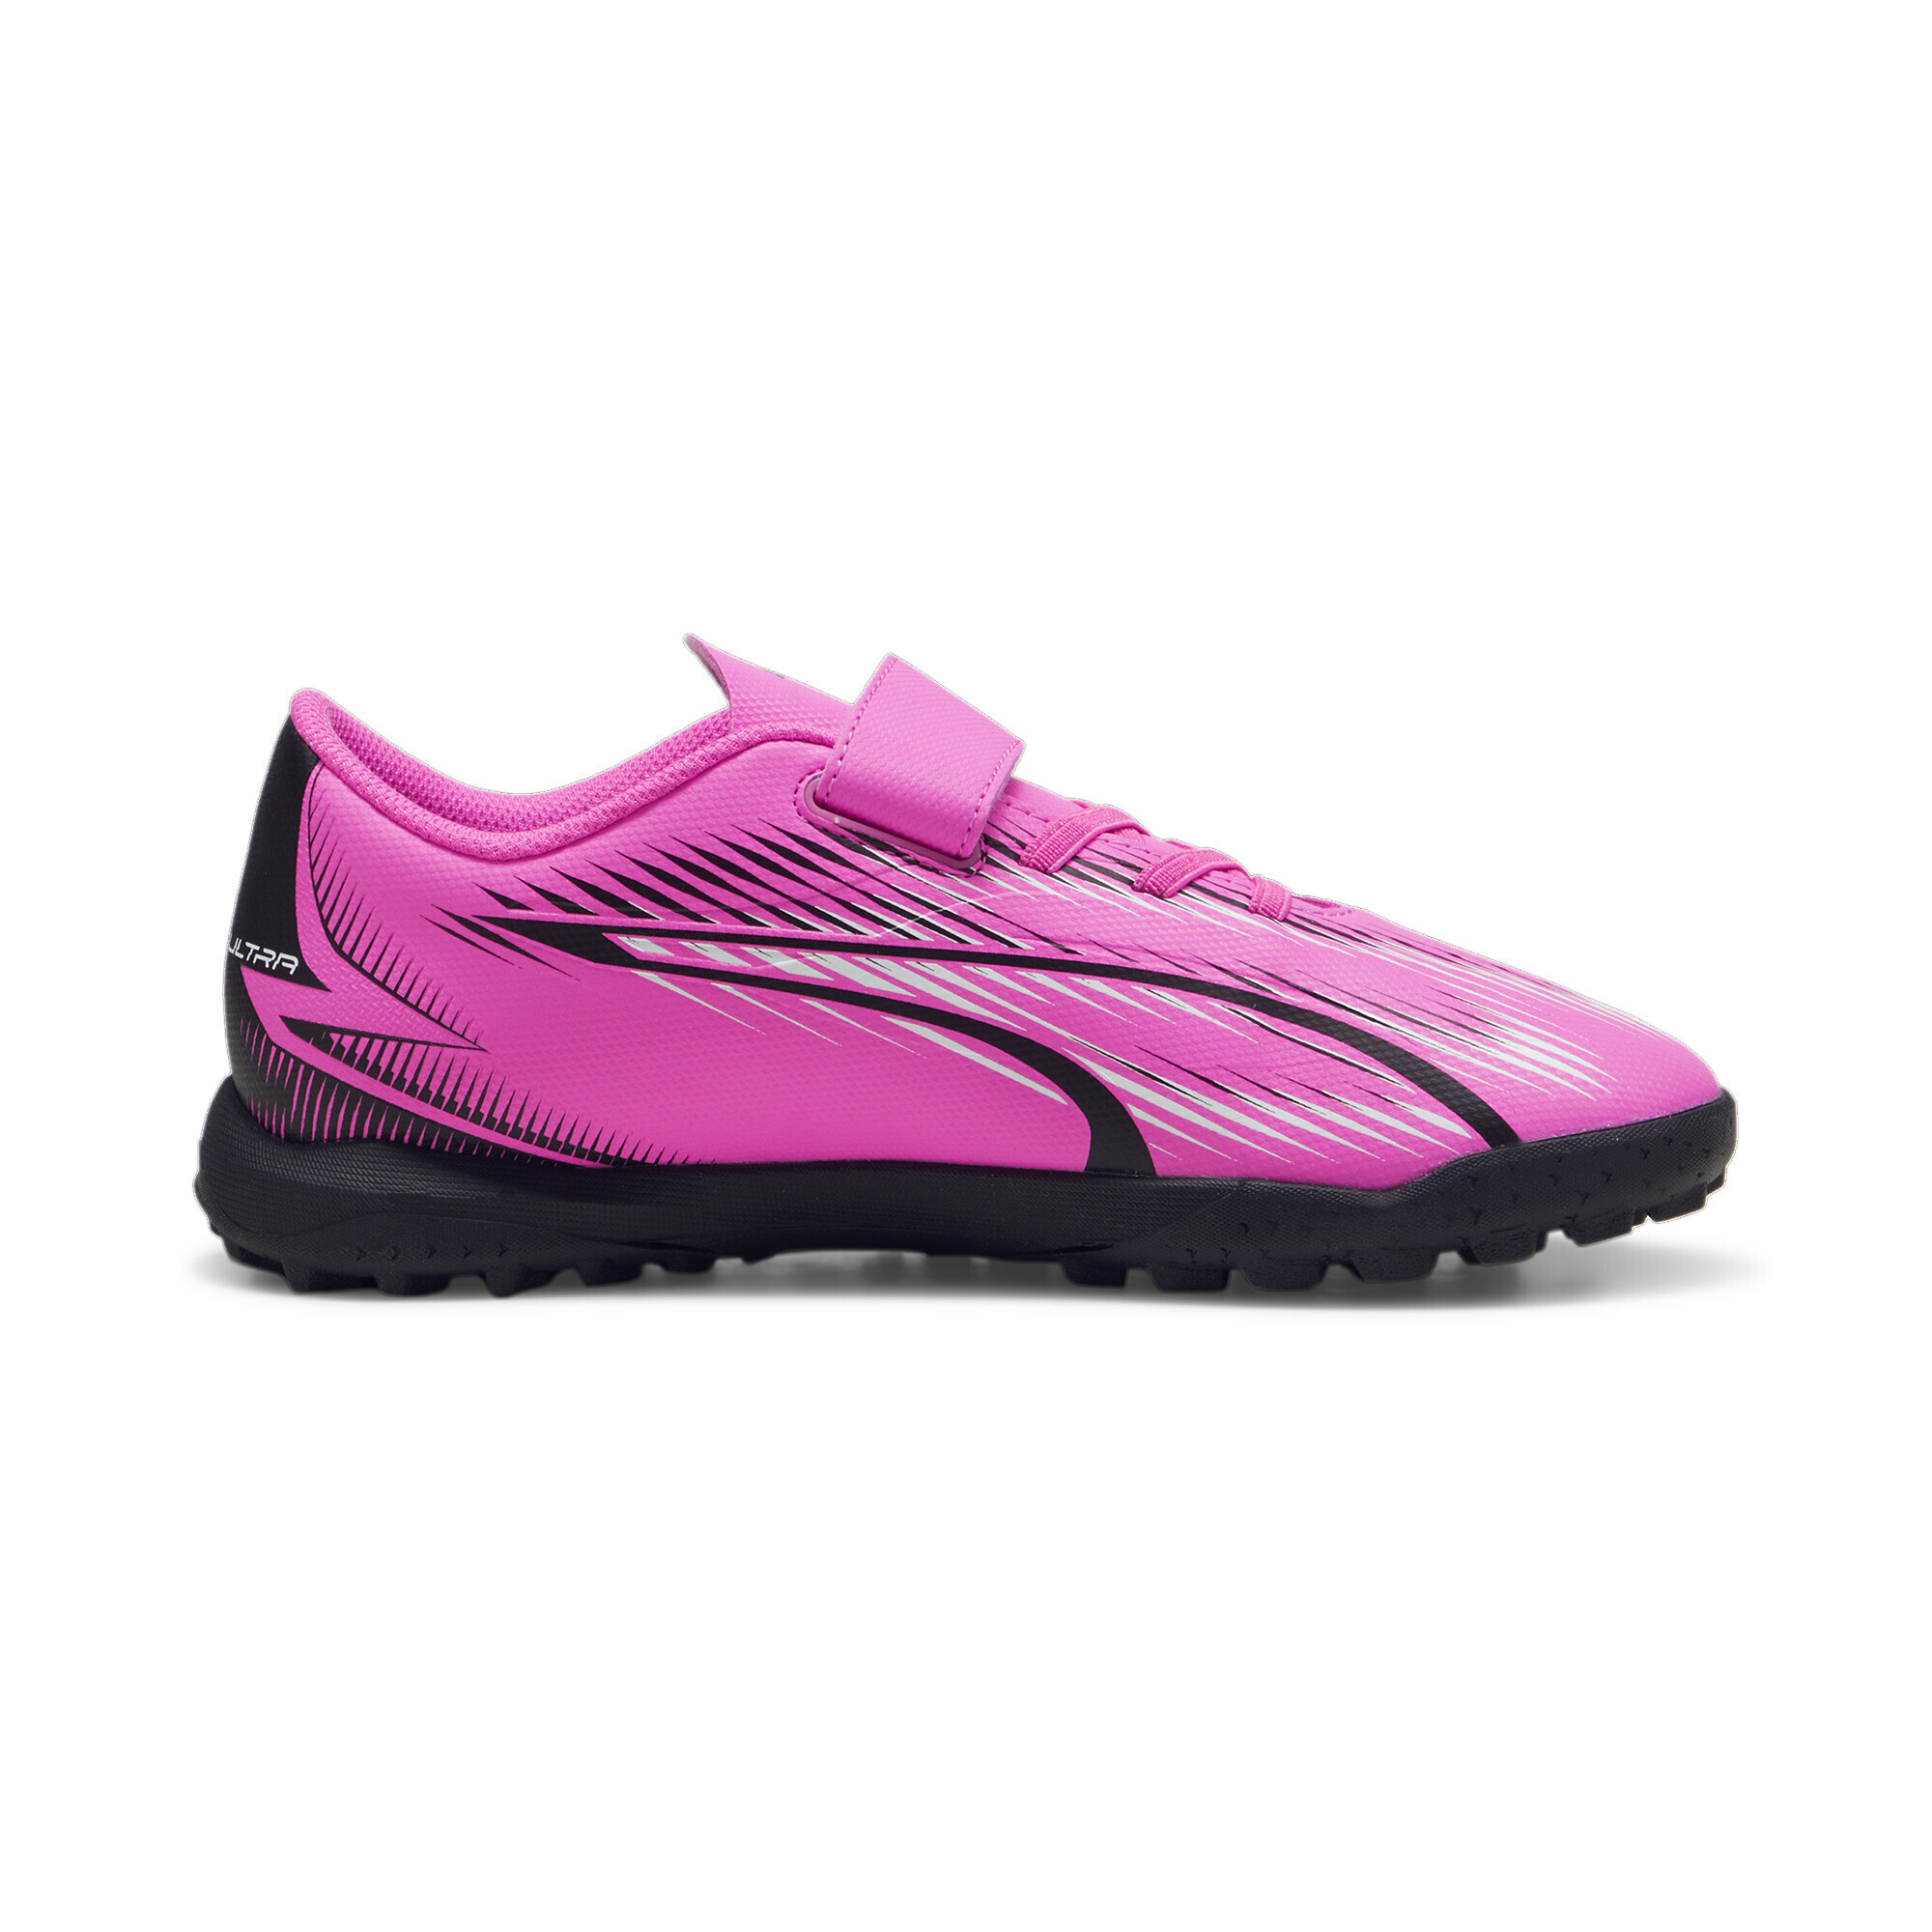 PUMA ULTRA PLAY TT Youth Football Boots In Pink, Size EU 31